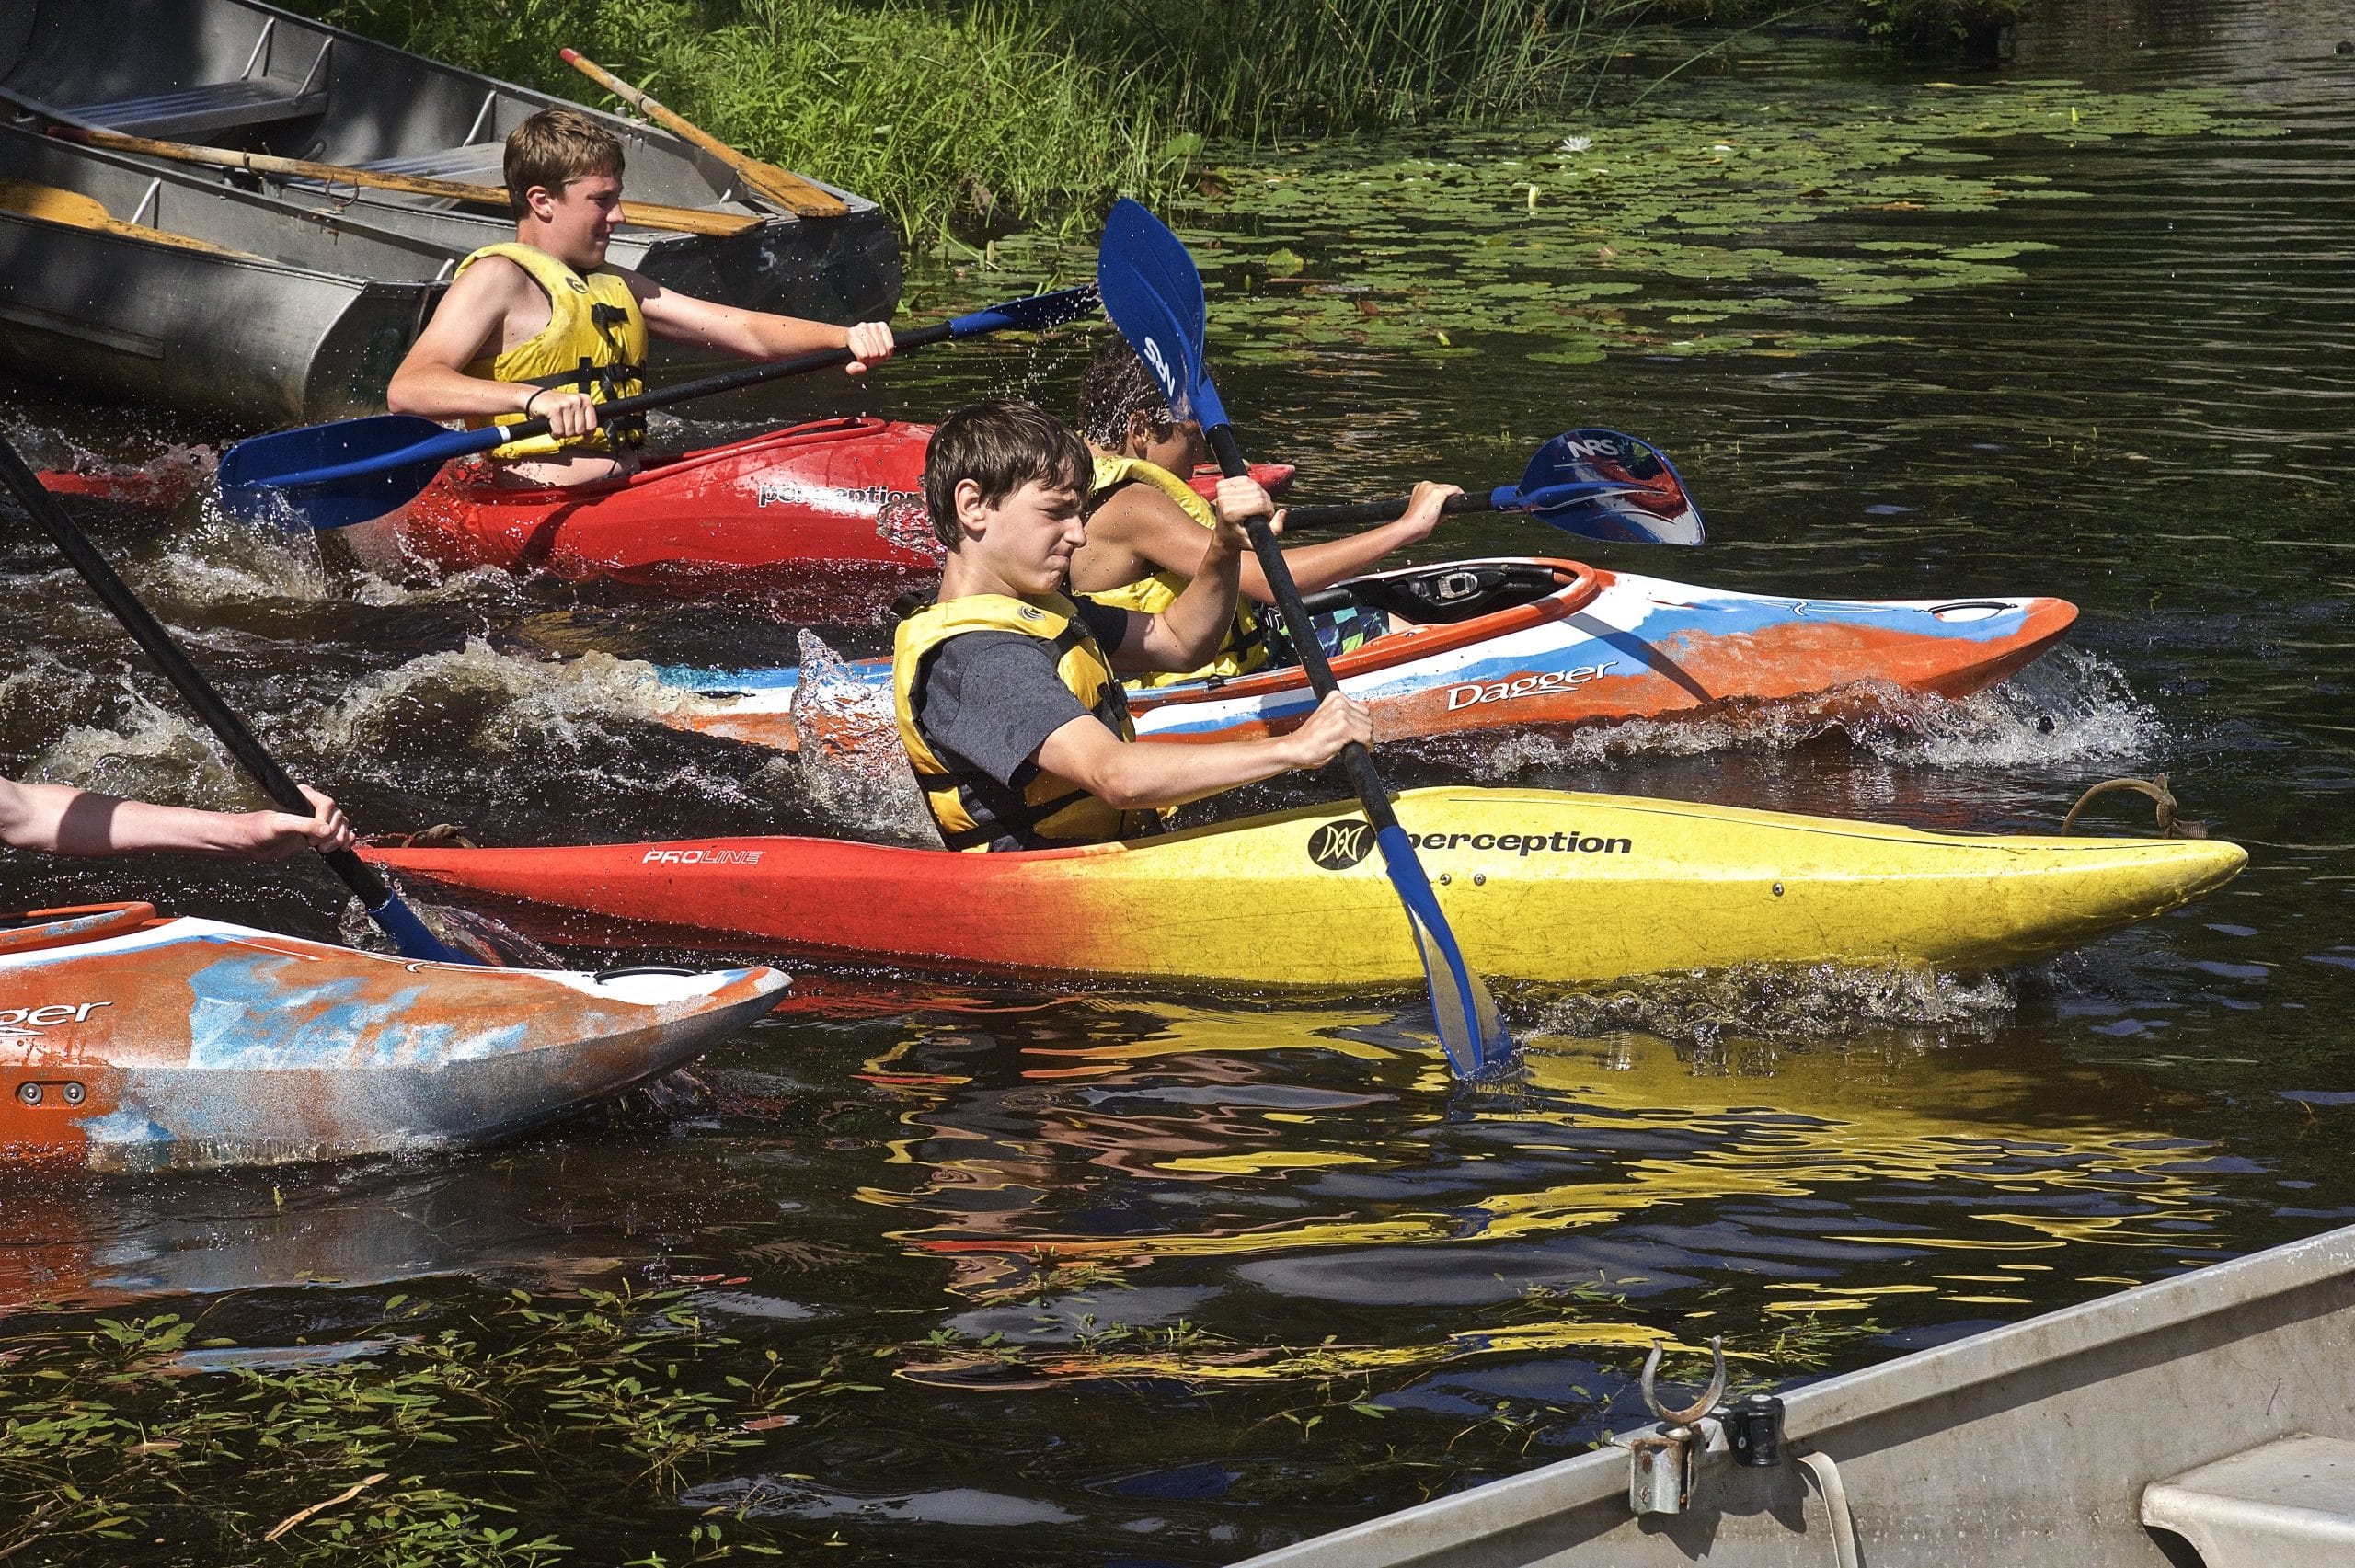 Boating Activity in Summer Camp